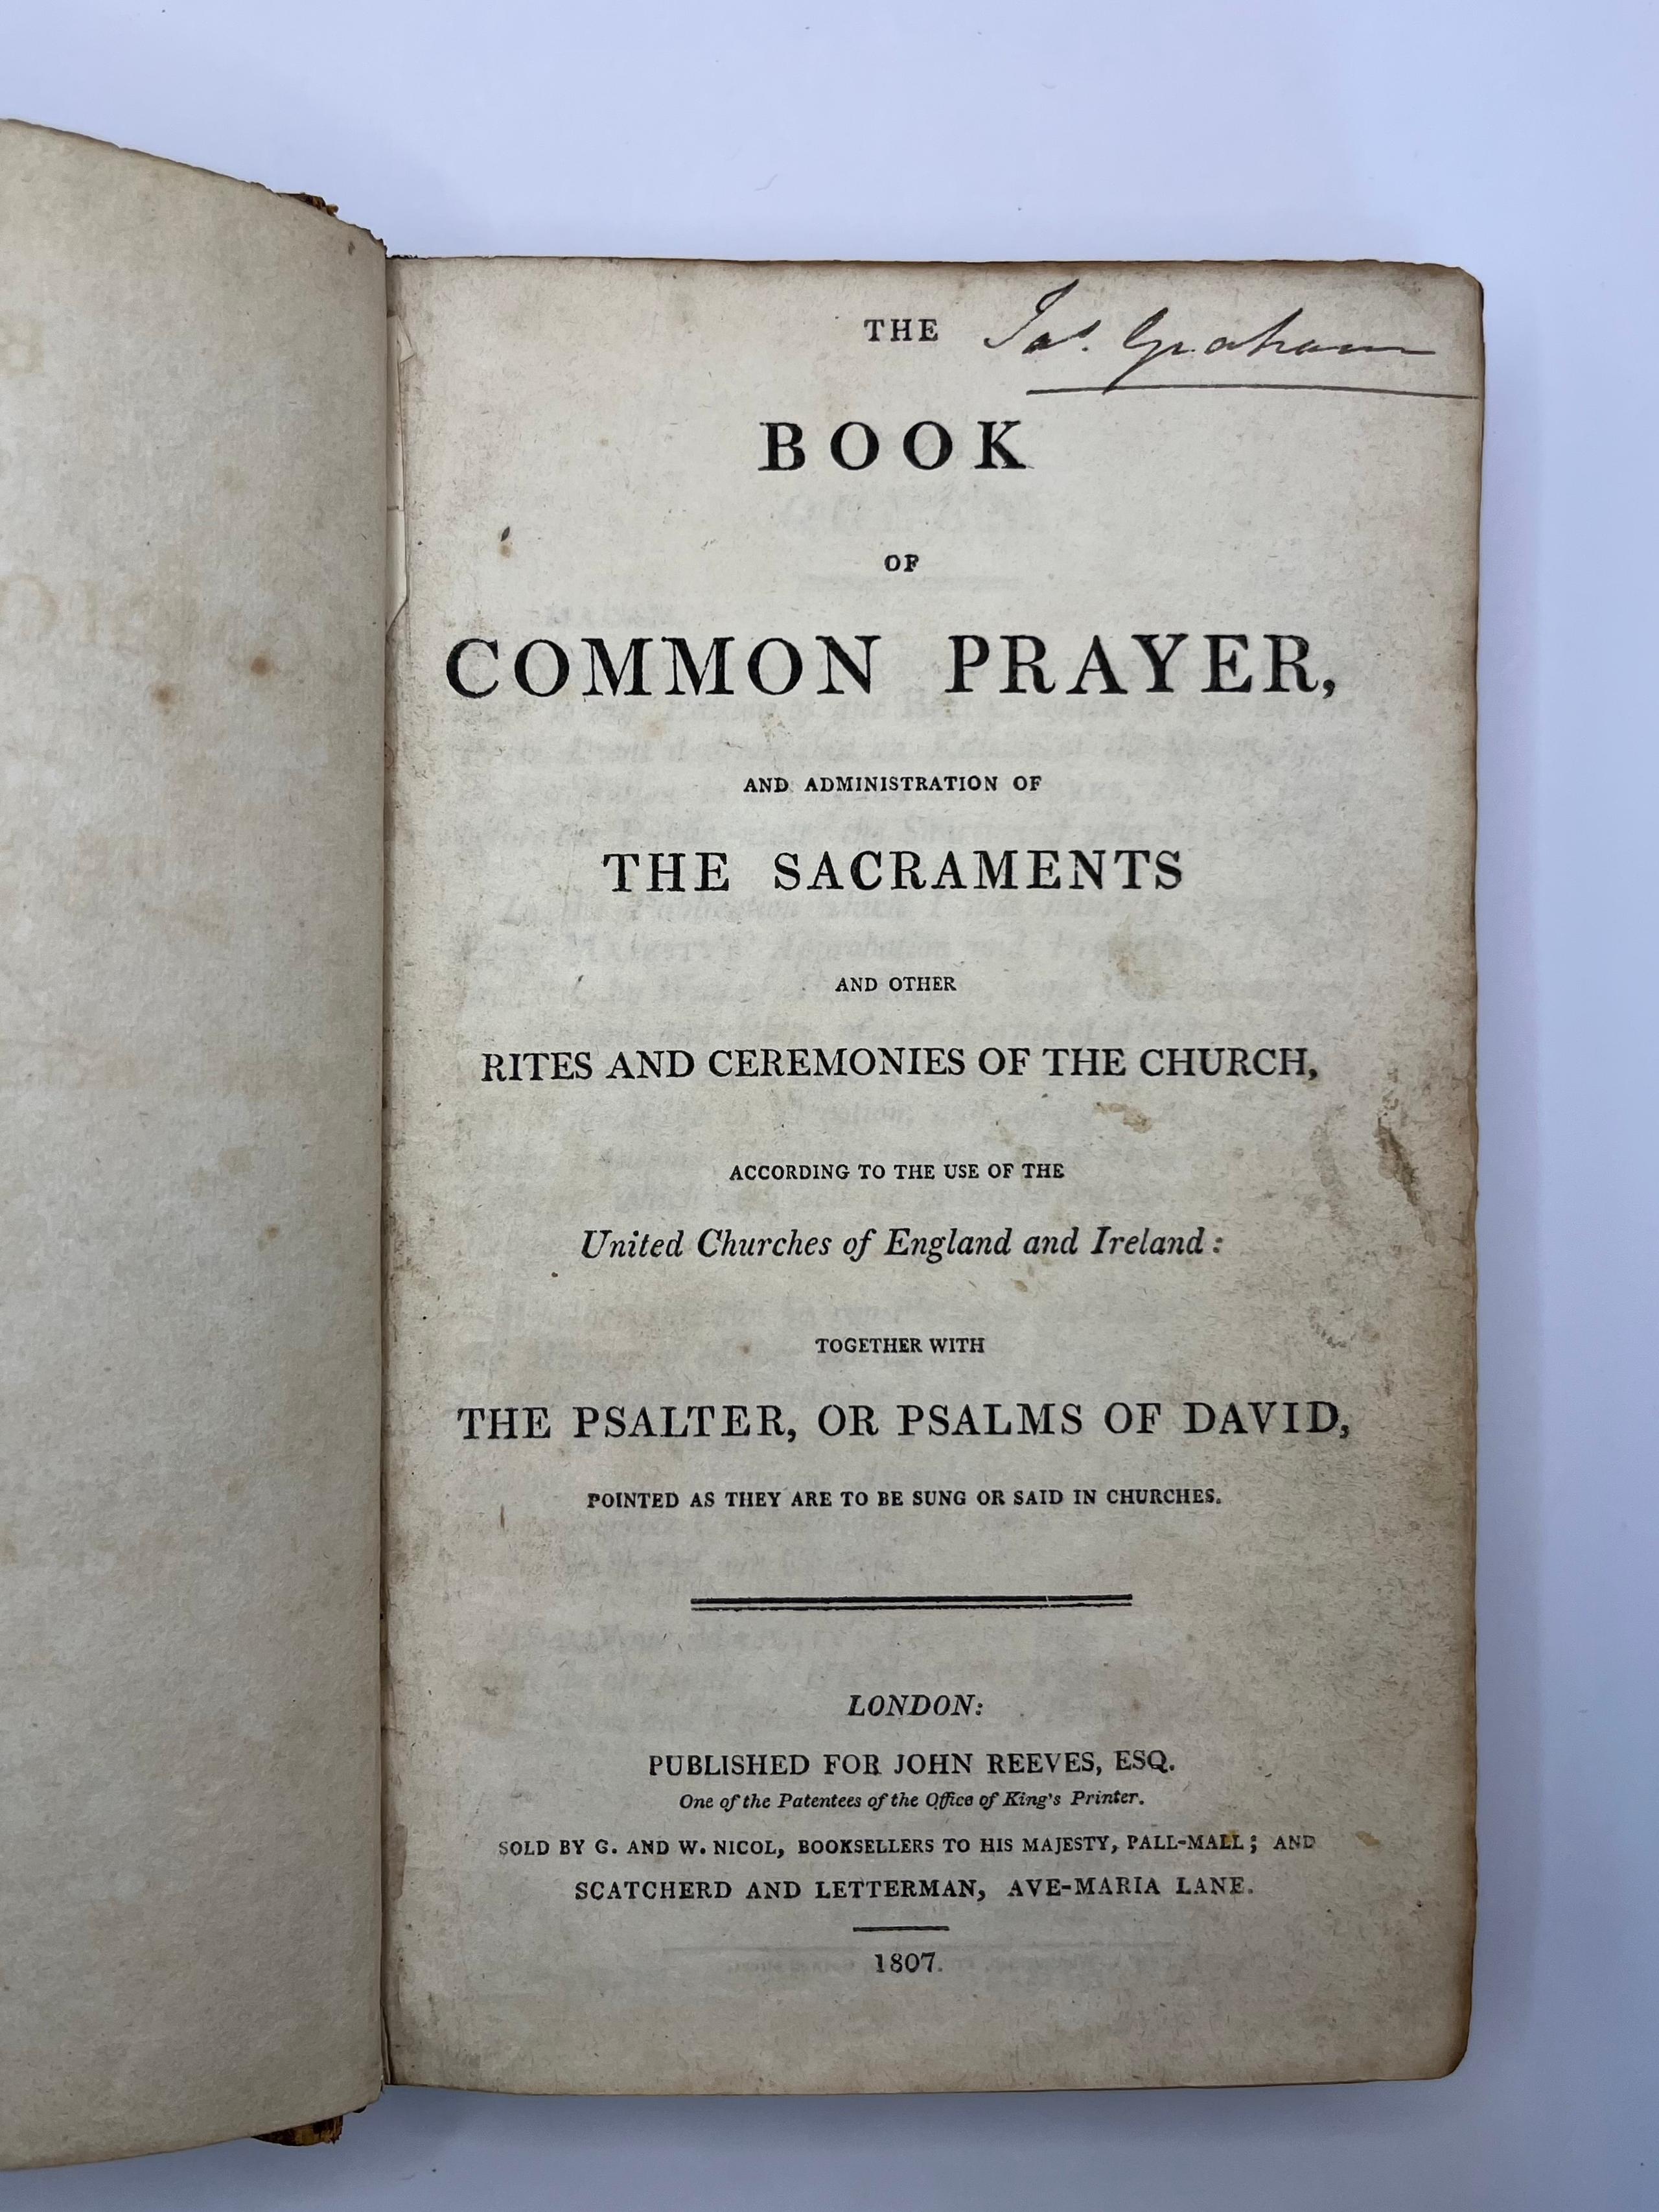 The Book of Common Prayer, and Administration of the Sacraments